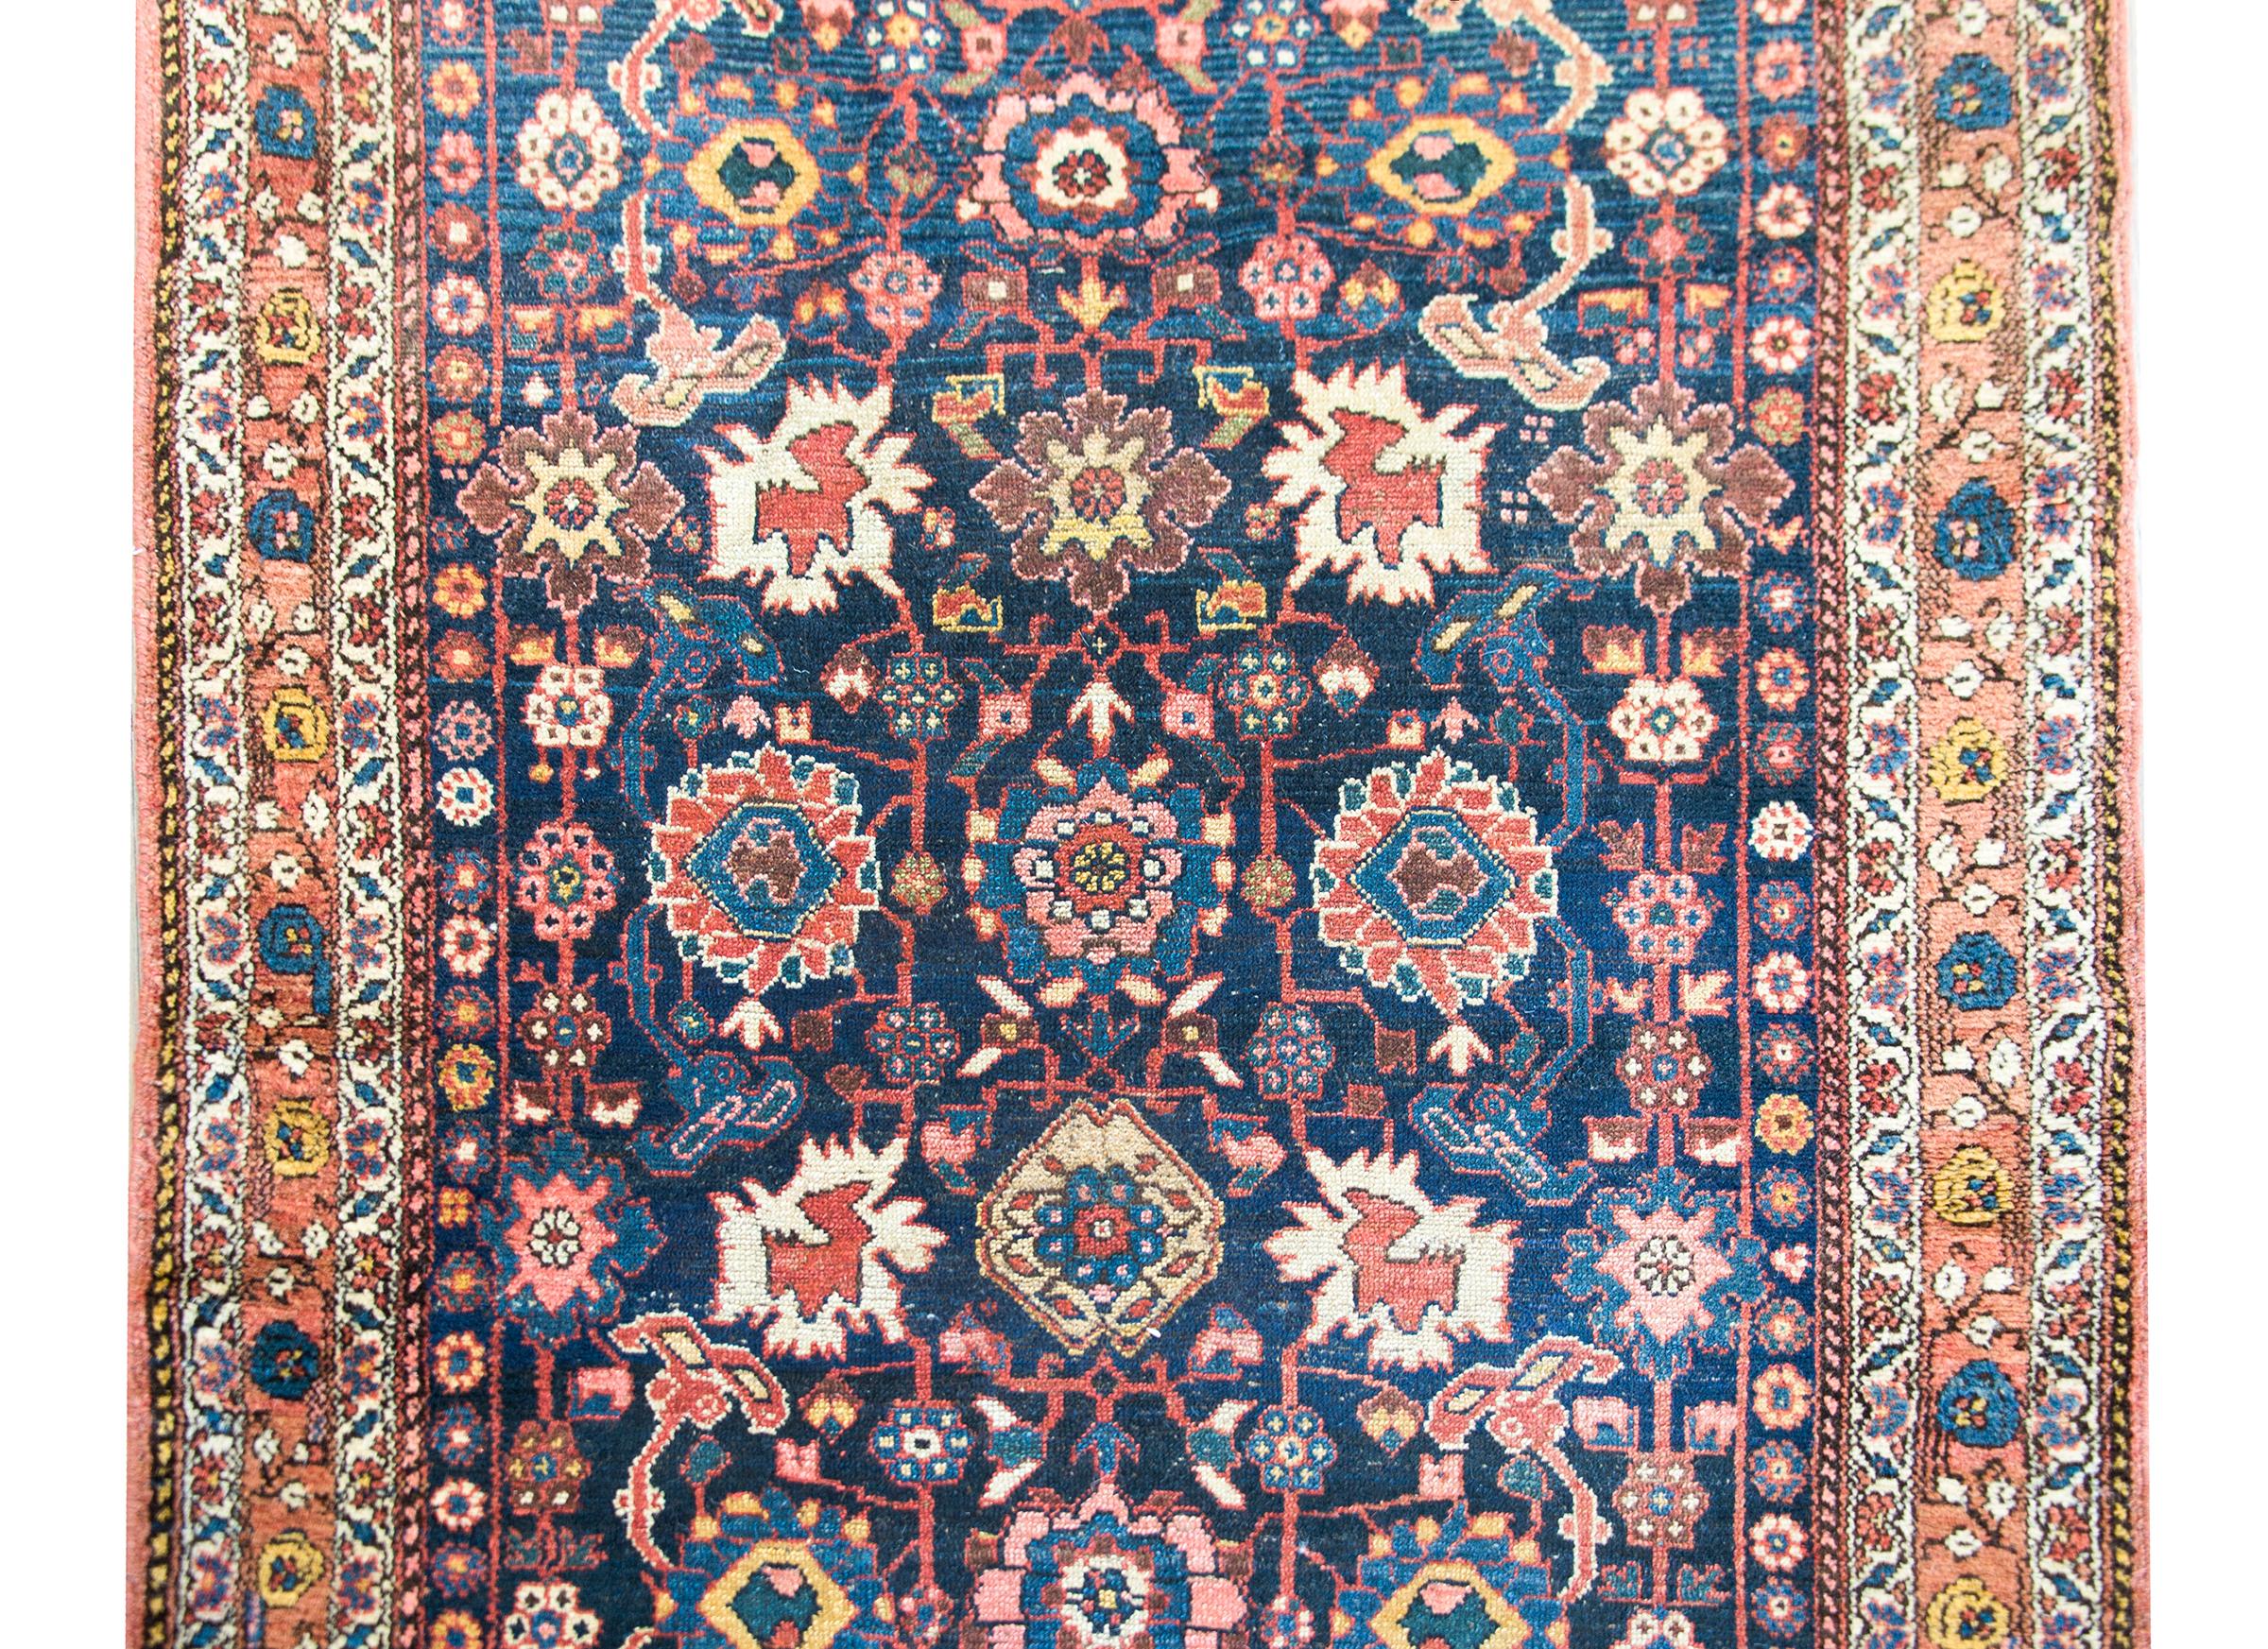 A stunning late 19th century Persian Kurdish rug with the most beautiful all-over large-scale mirrored floral pattern woven in crimson, white, gold, pink, and set against a dark indigo background. The border is equally as beautiful with a central